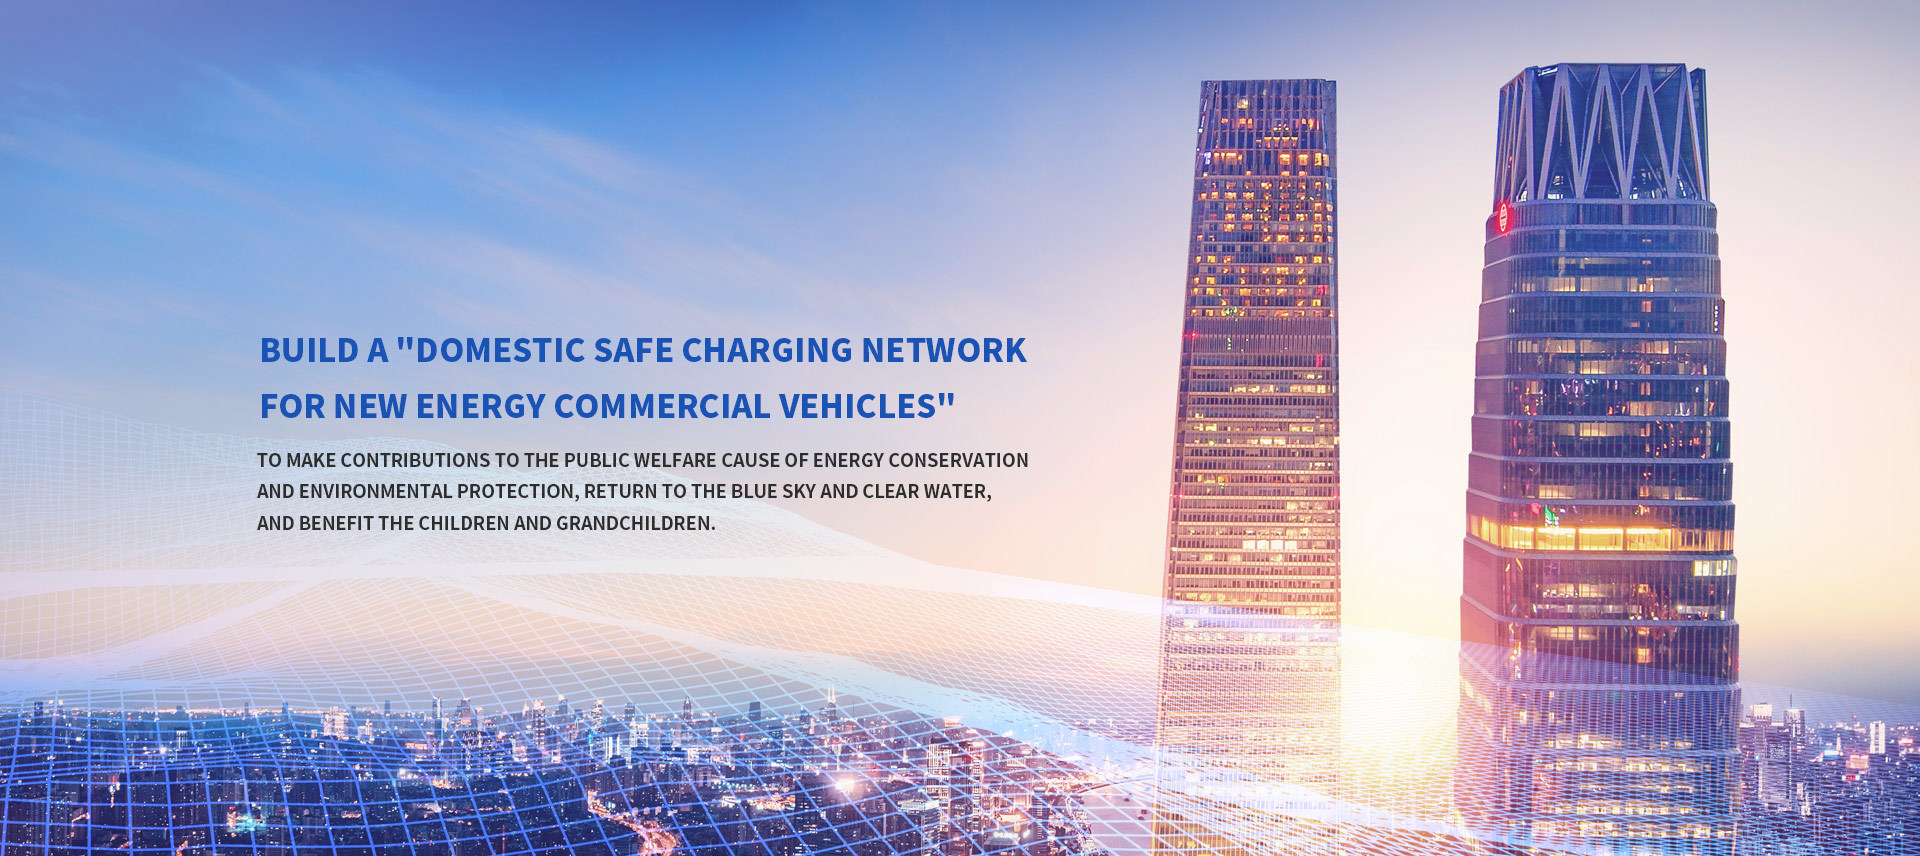 Domestic safe new energy commercial vehicle charging network